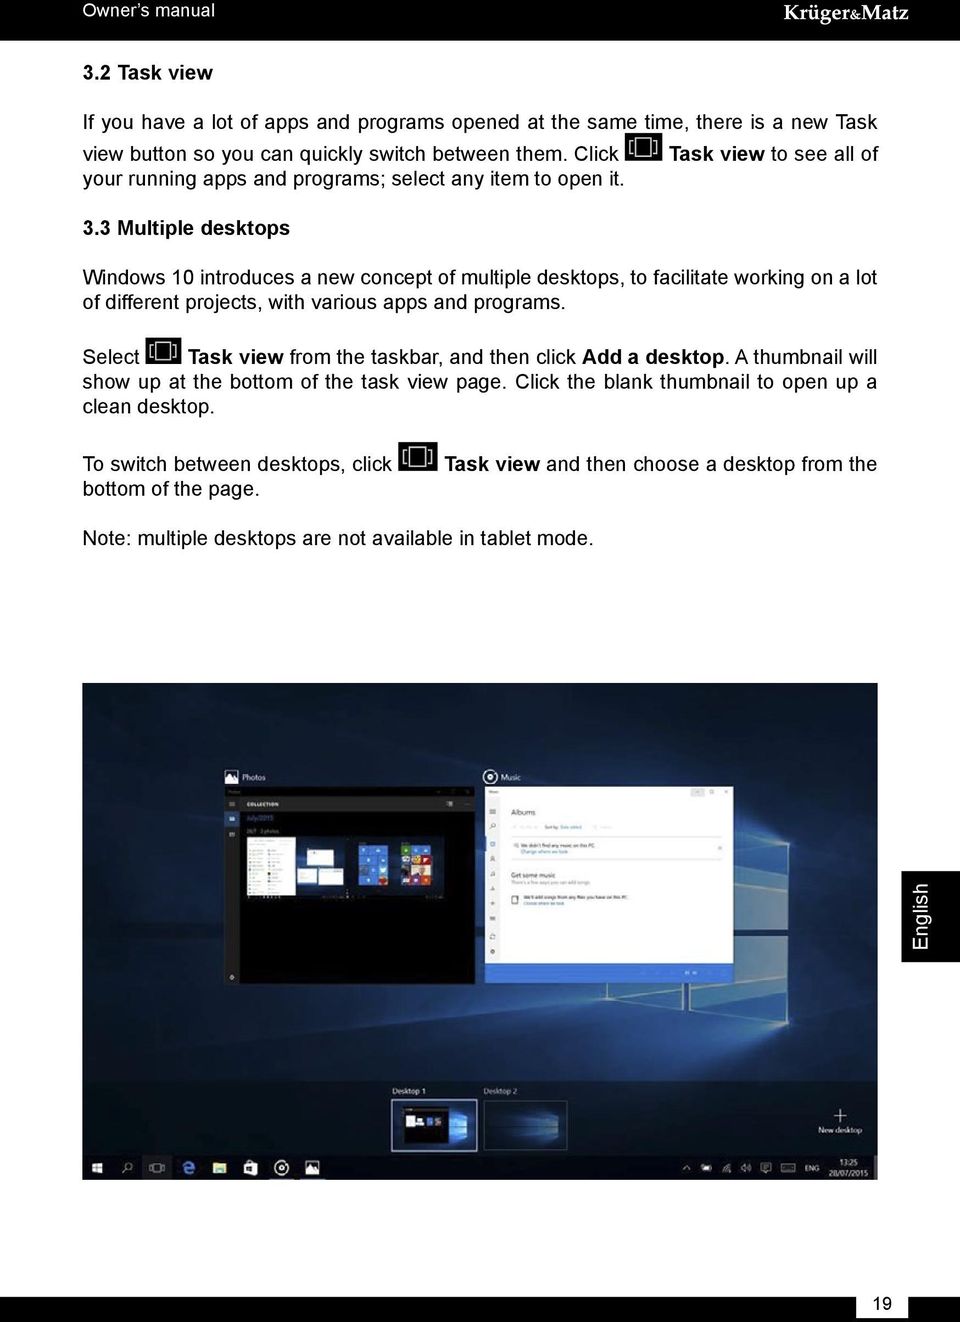 3 Multiple desktops Windows 10 introduces a new concept of multiple desktops, to facilitate working on a lot of different projects, with various apps and programs.